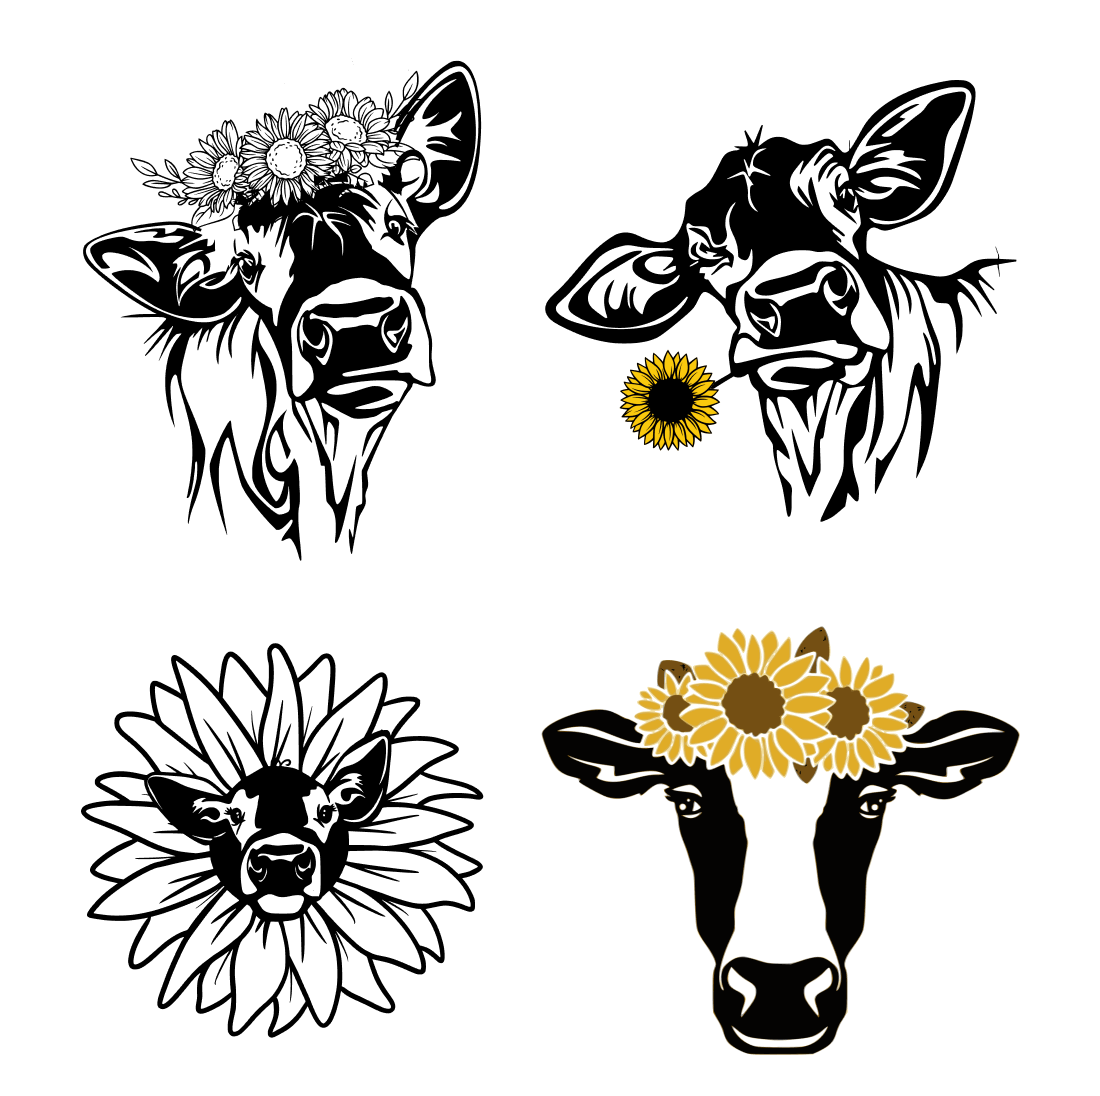 Cow with a flower in its mouth.